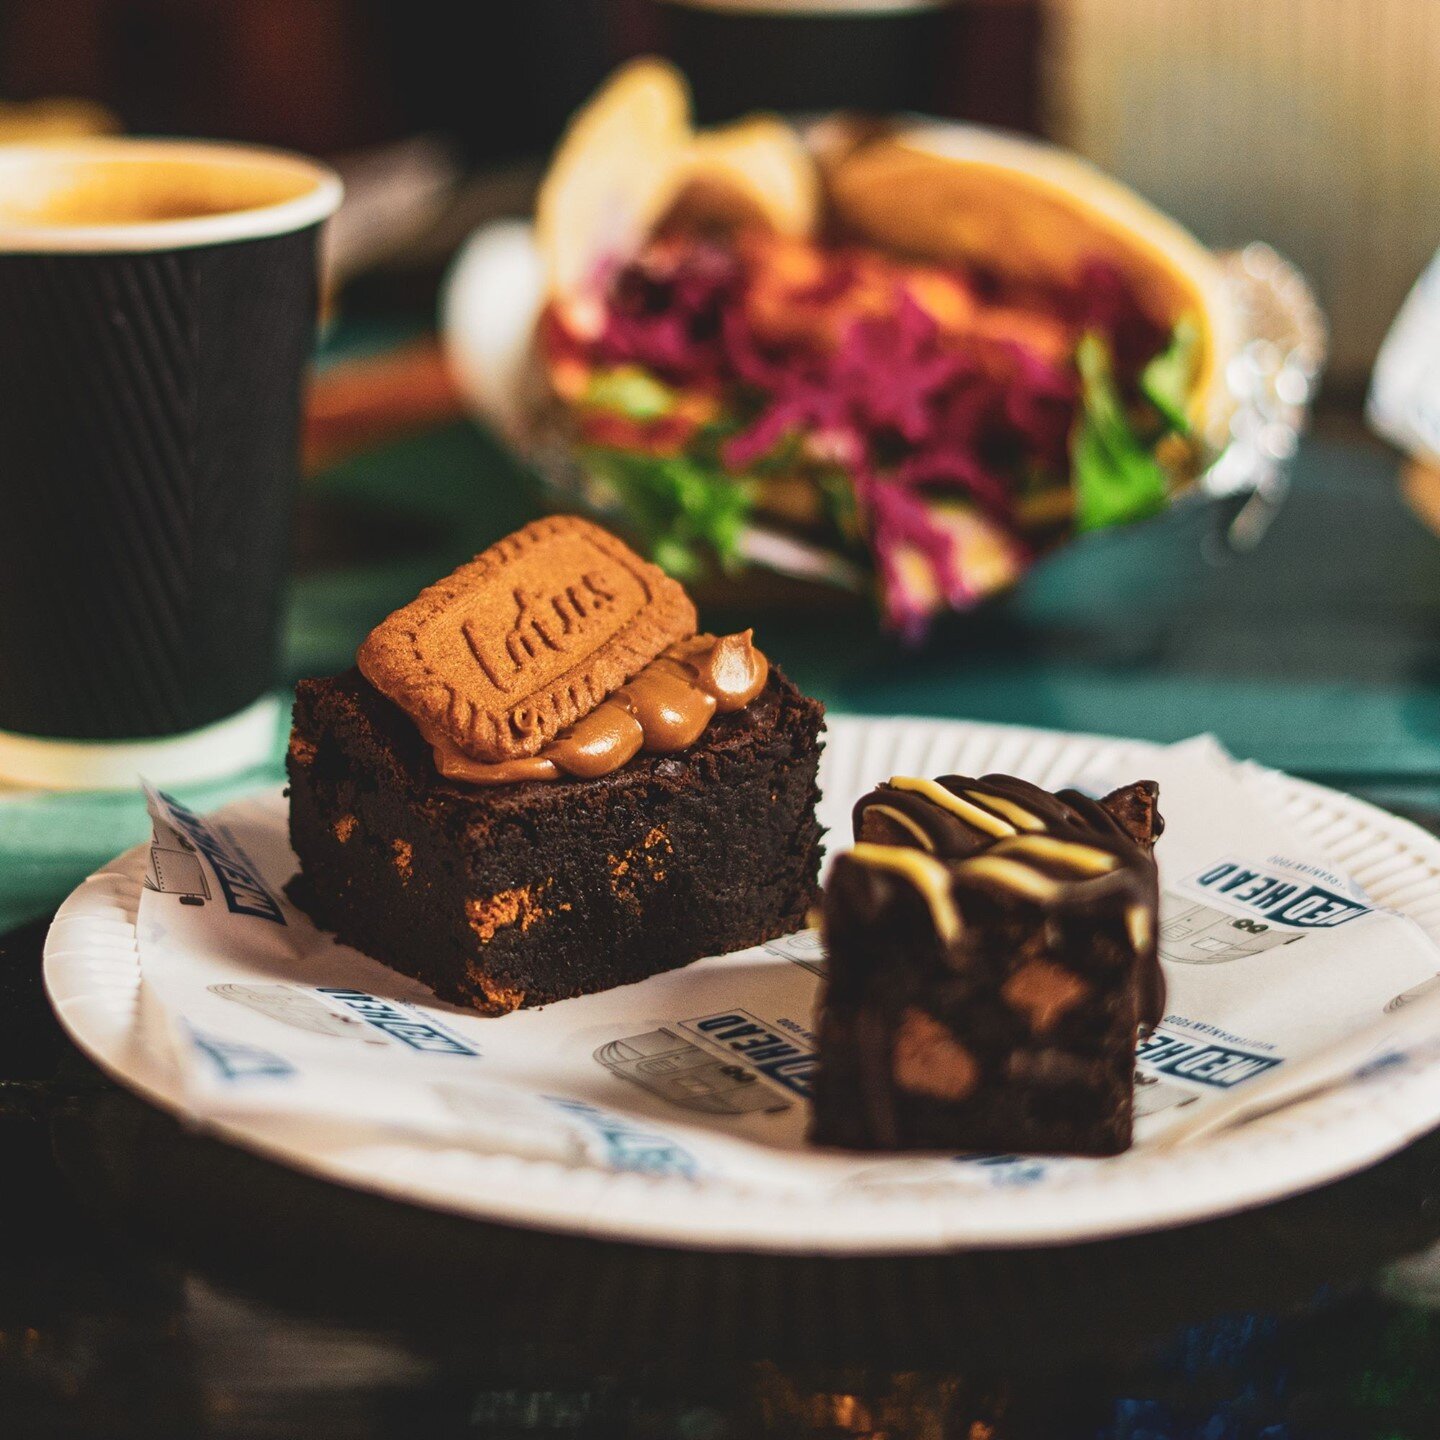 Chocolate is the answer. Our triple chocolate and biscoff brownies are cooked to absolute perfection. They live up to the hype 🍫⠀
⠀
⠀
⠀
#theloadingbay #theloadingbaynorthshields #northshieldsfishquay #streetfood #coffee #foodie #foodiesuk #nefoodies